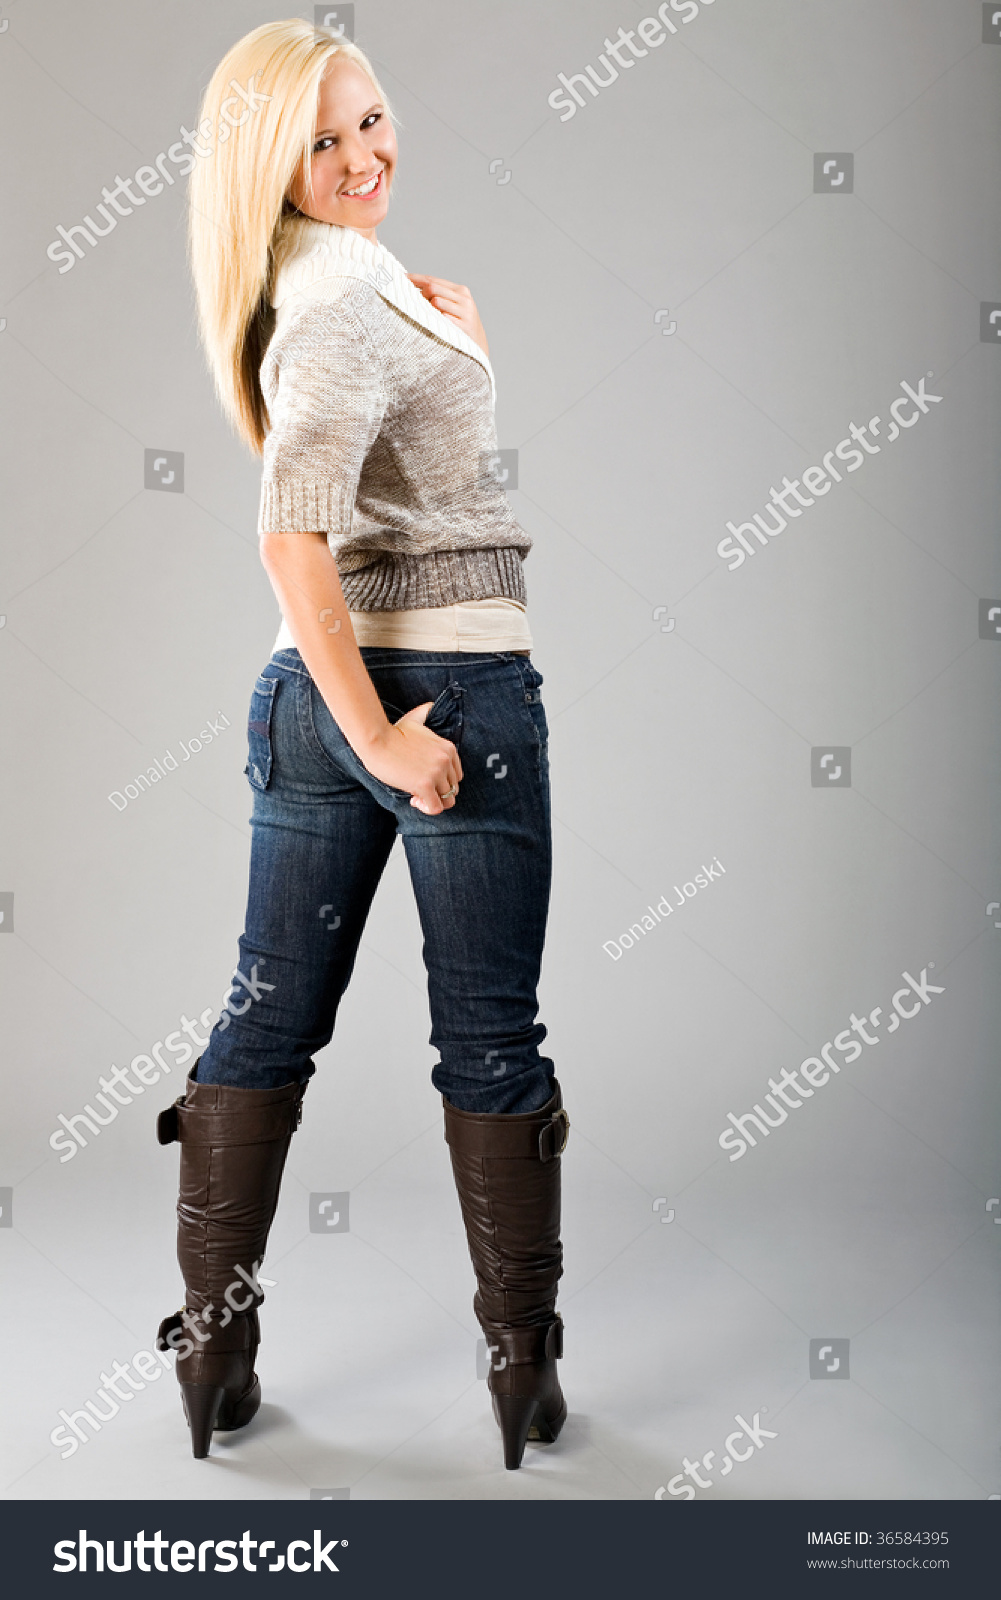 Fashion Boots Jeans Teen Stock Photo 36584395 - Shutterstock